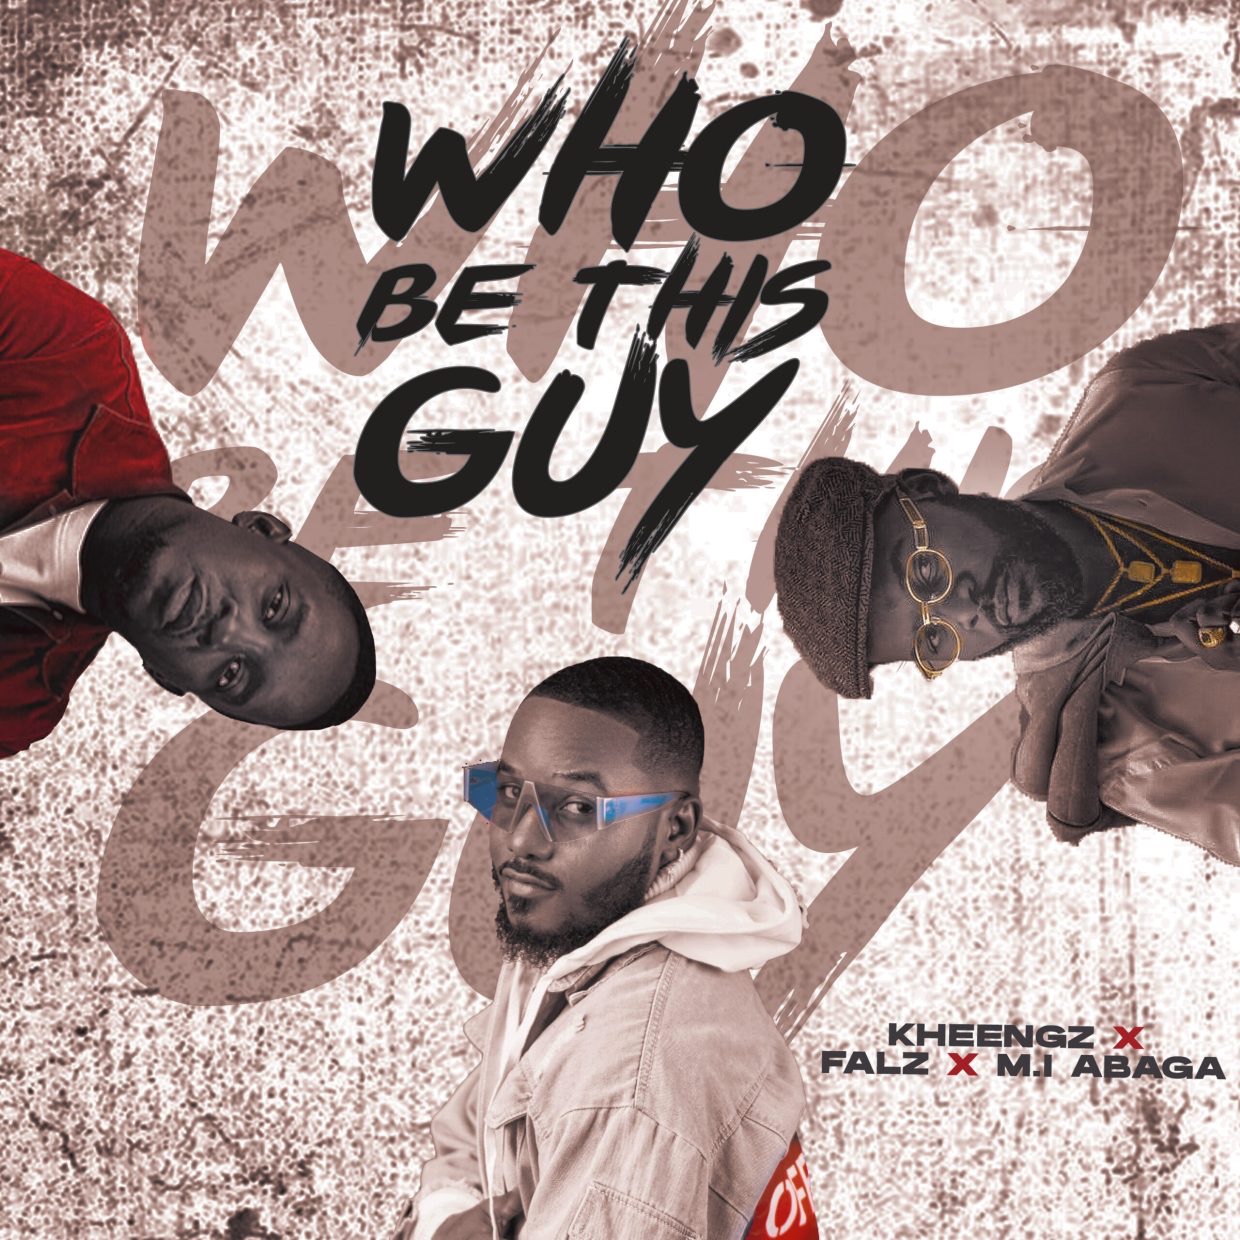 Kheengz ft Falz And M.I Abaga – Who Be This Guy Free Mp3 Download